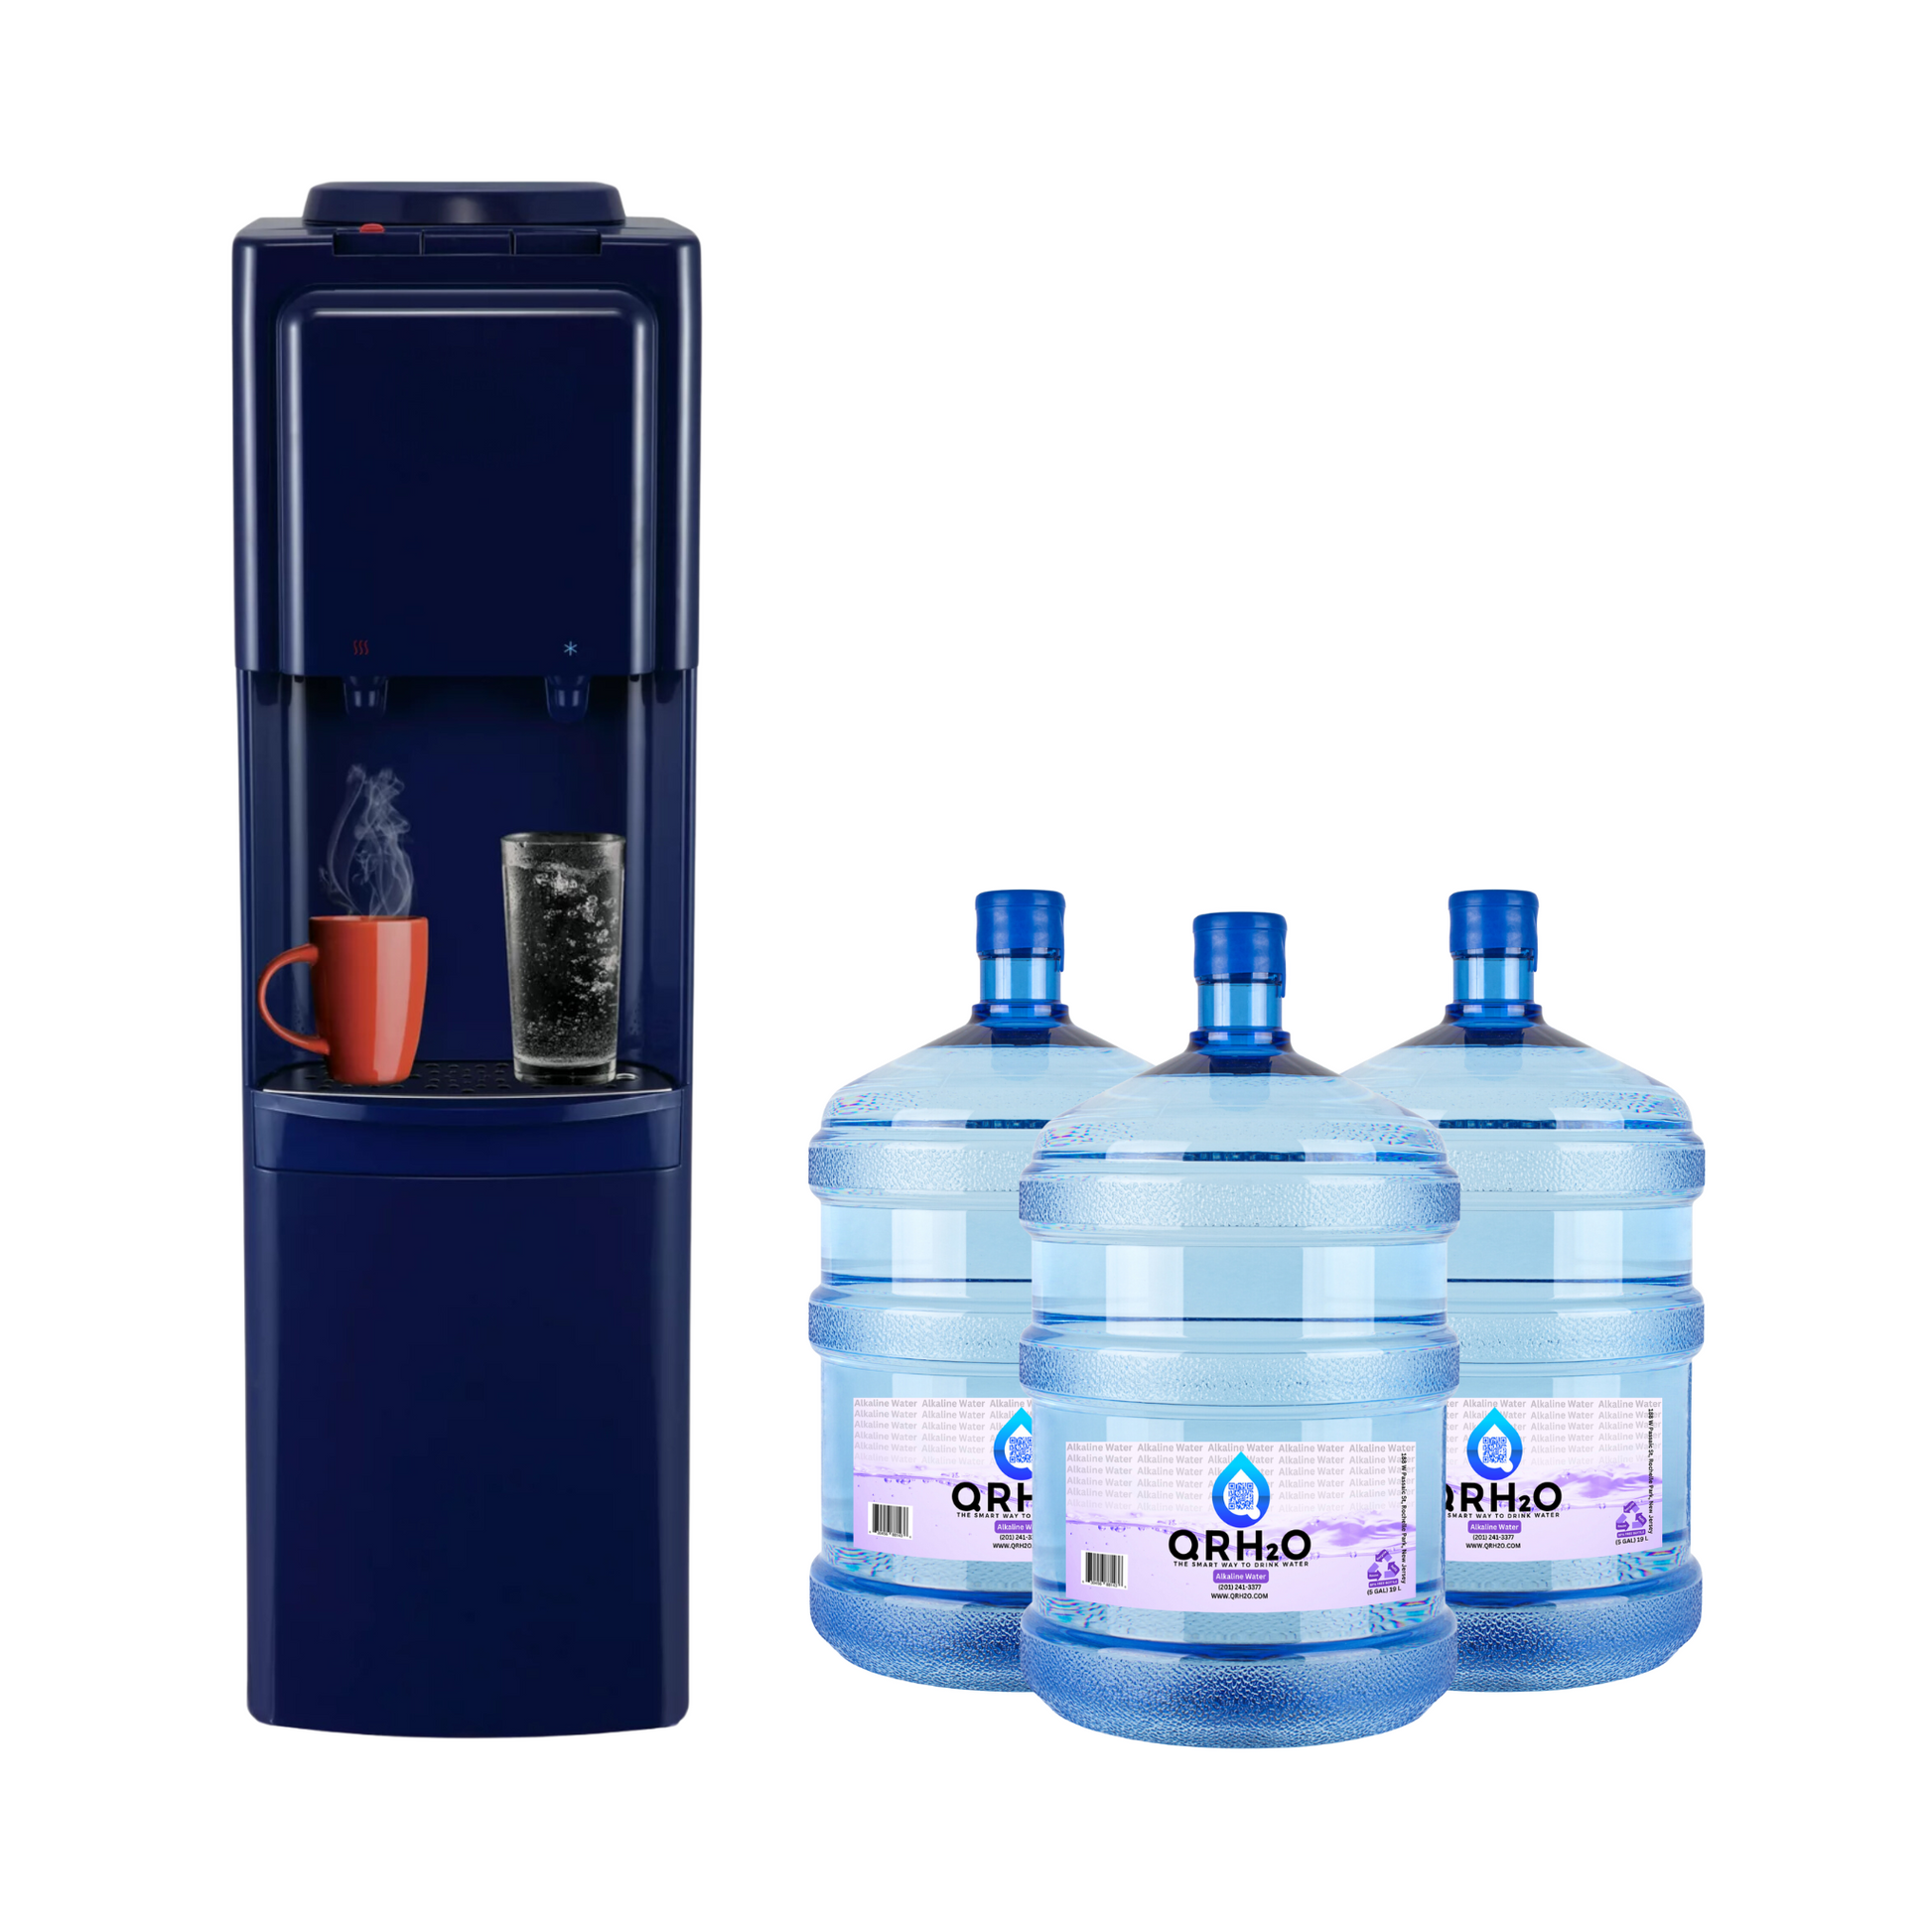 Upgrade your water supply with 3 of our 5-gallon bottles, providing purified or alkaline water options, and a top-loading hot and cold dispenser in a contemporary navy blue finish from Primo.